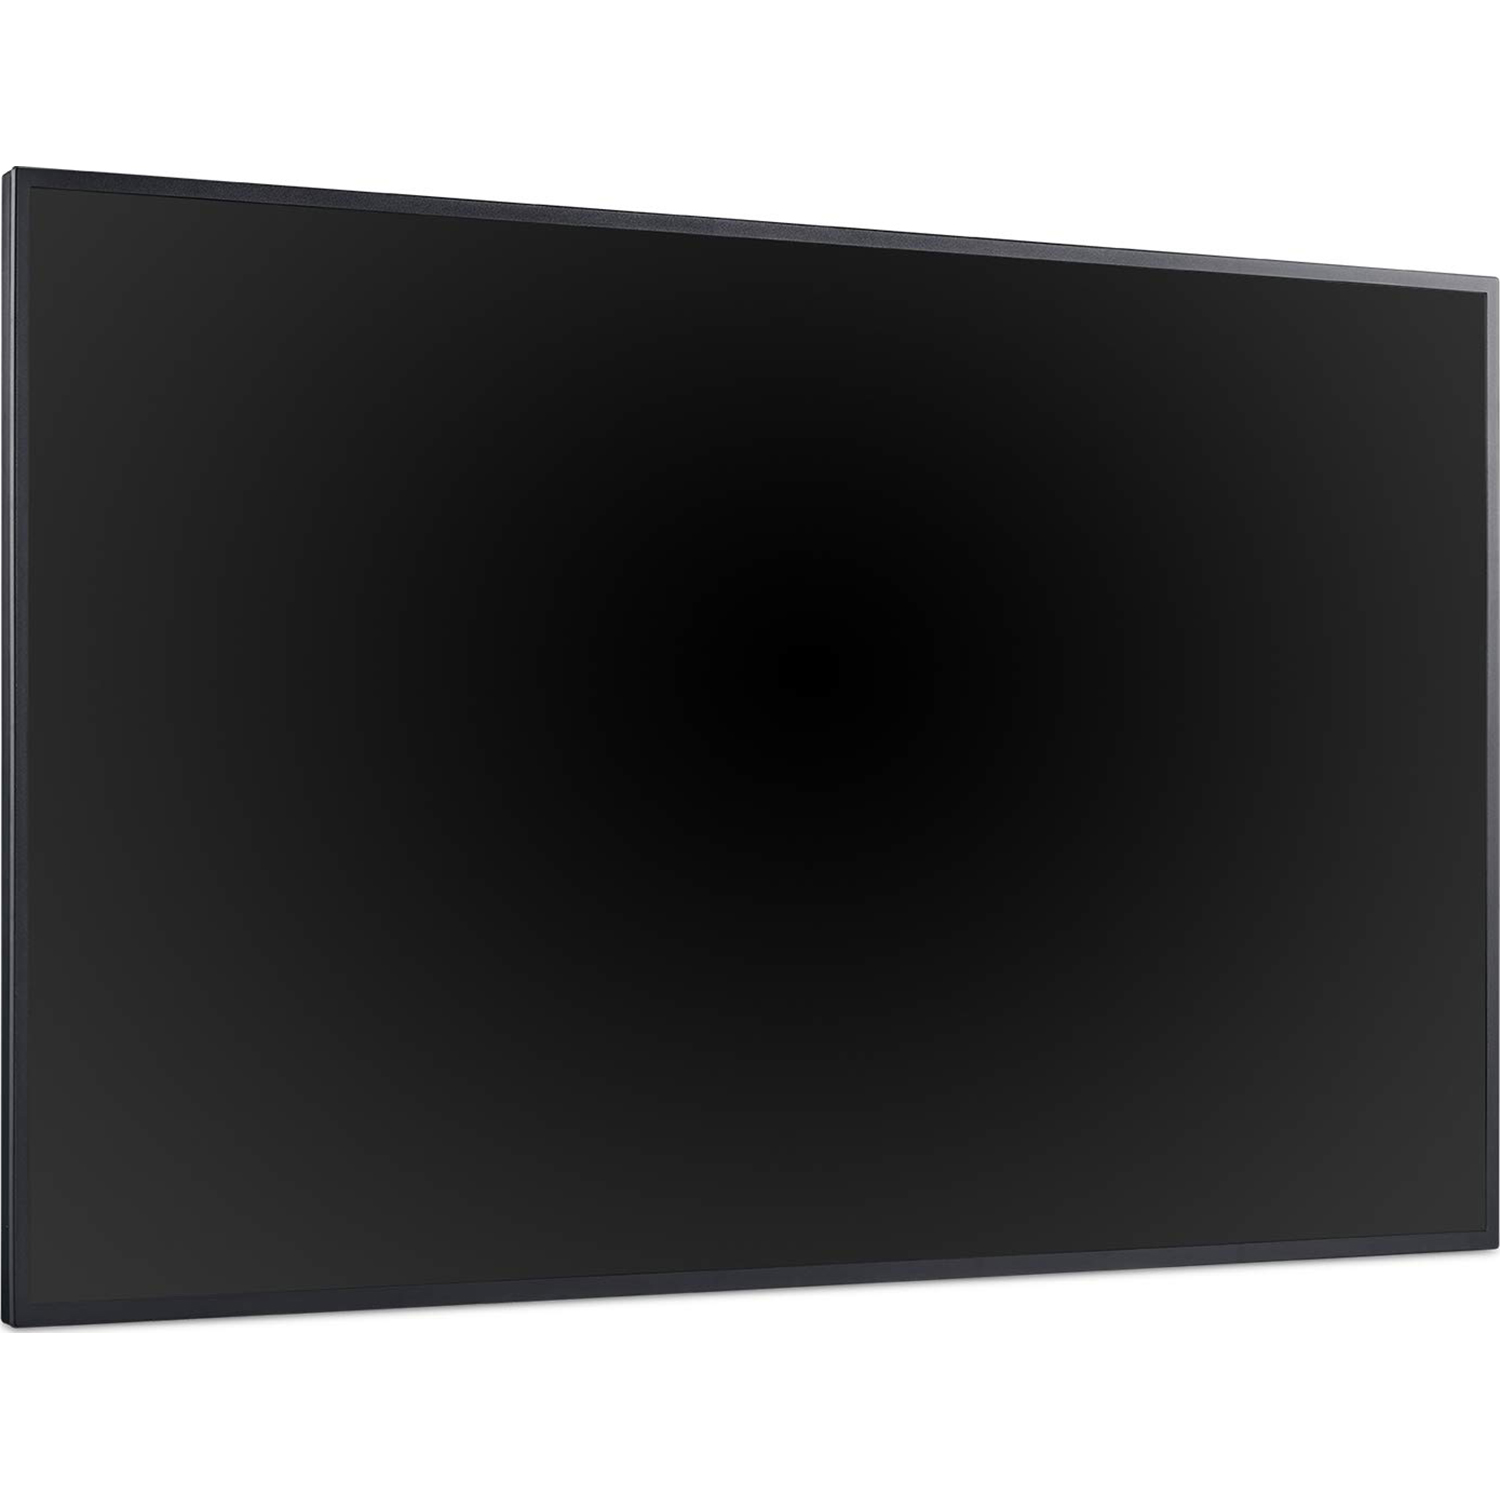 ViewSonic CDE6510 - 65" Diagonal Class (64.5" viewable) LED-backlit LCD display - digital signage - with built-in SoC media player - 4K UHD (2160p) 3840 x 2160 - direct-lit LED - image 2 of 7